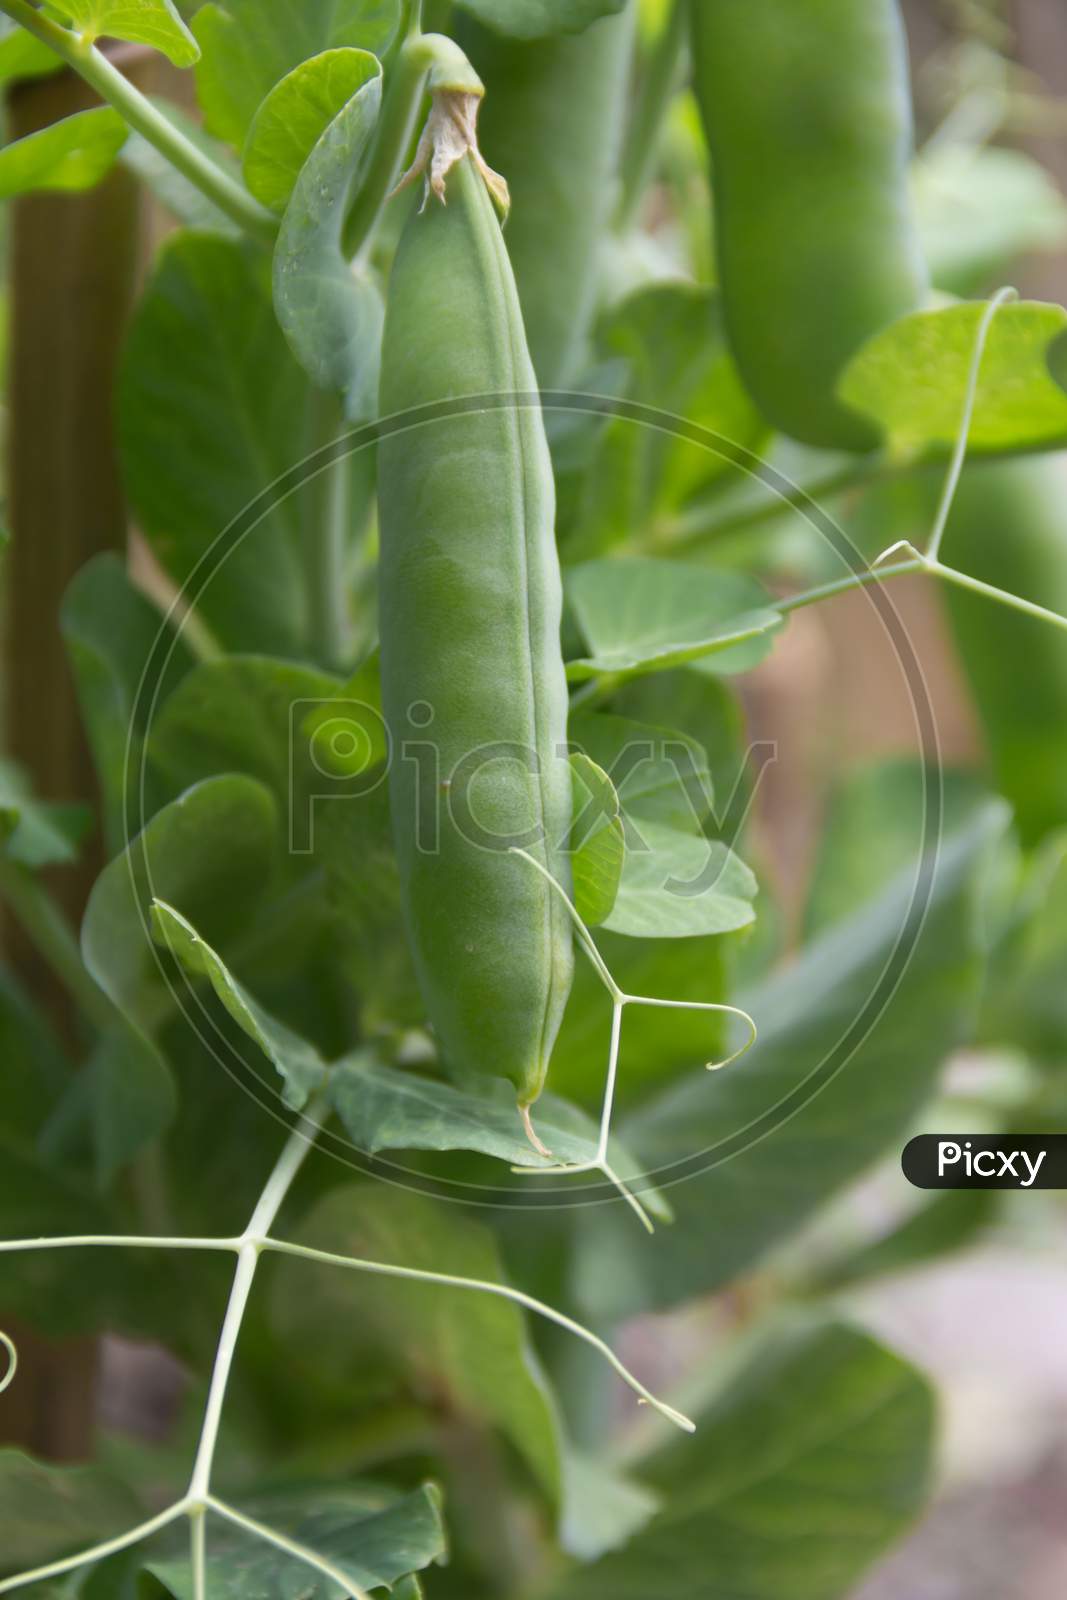 Detail Of The Green Pea Beans On The Organic Garden Plant